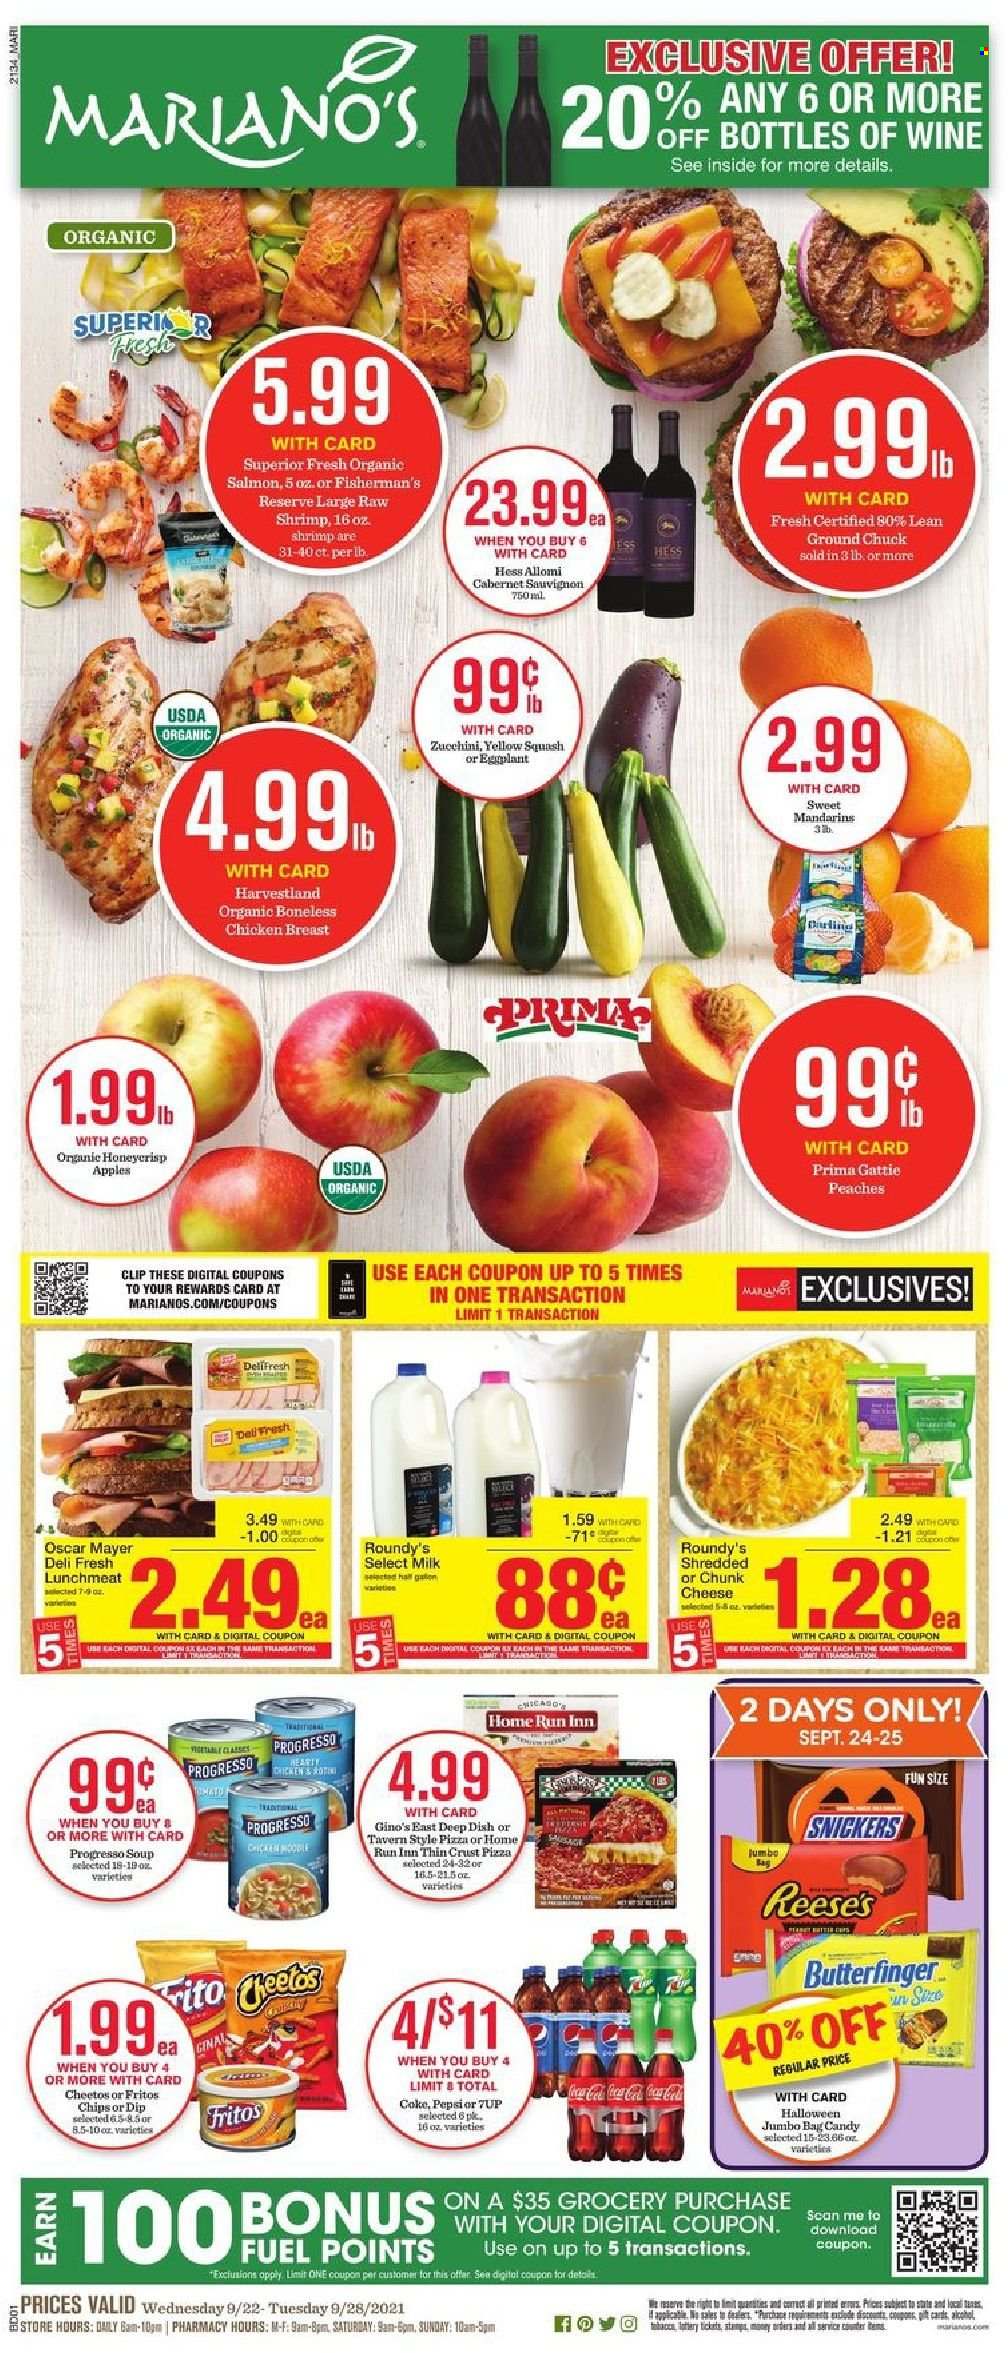 thumbnail - Mariano’s Flyer - 09/22/2021 - 09/28/2021 - Sales products - cake, zucchini, eggplant, mandarines, salmon, shrimps, pizza, Progresso, Oscar Mayer, lunch meat, chunk cheese, milk, dip, Reese's, Snickers, Fritos, Cheetos, chips, Coca-Cola, 7UP, Cabernet Sauvignon, wine, chicken breasts, ground chuck, peaches. Page 1.